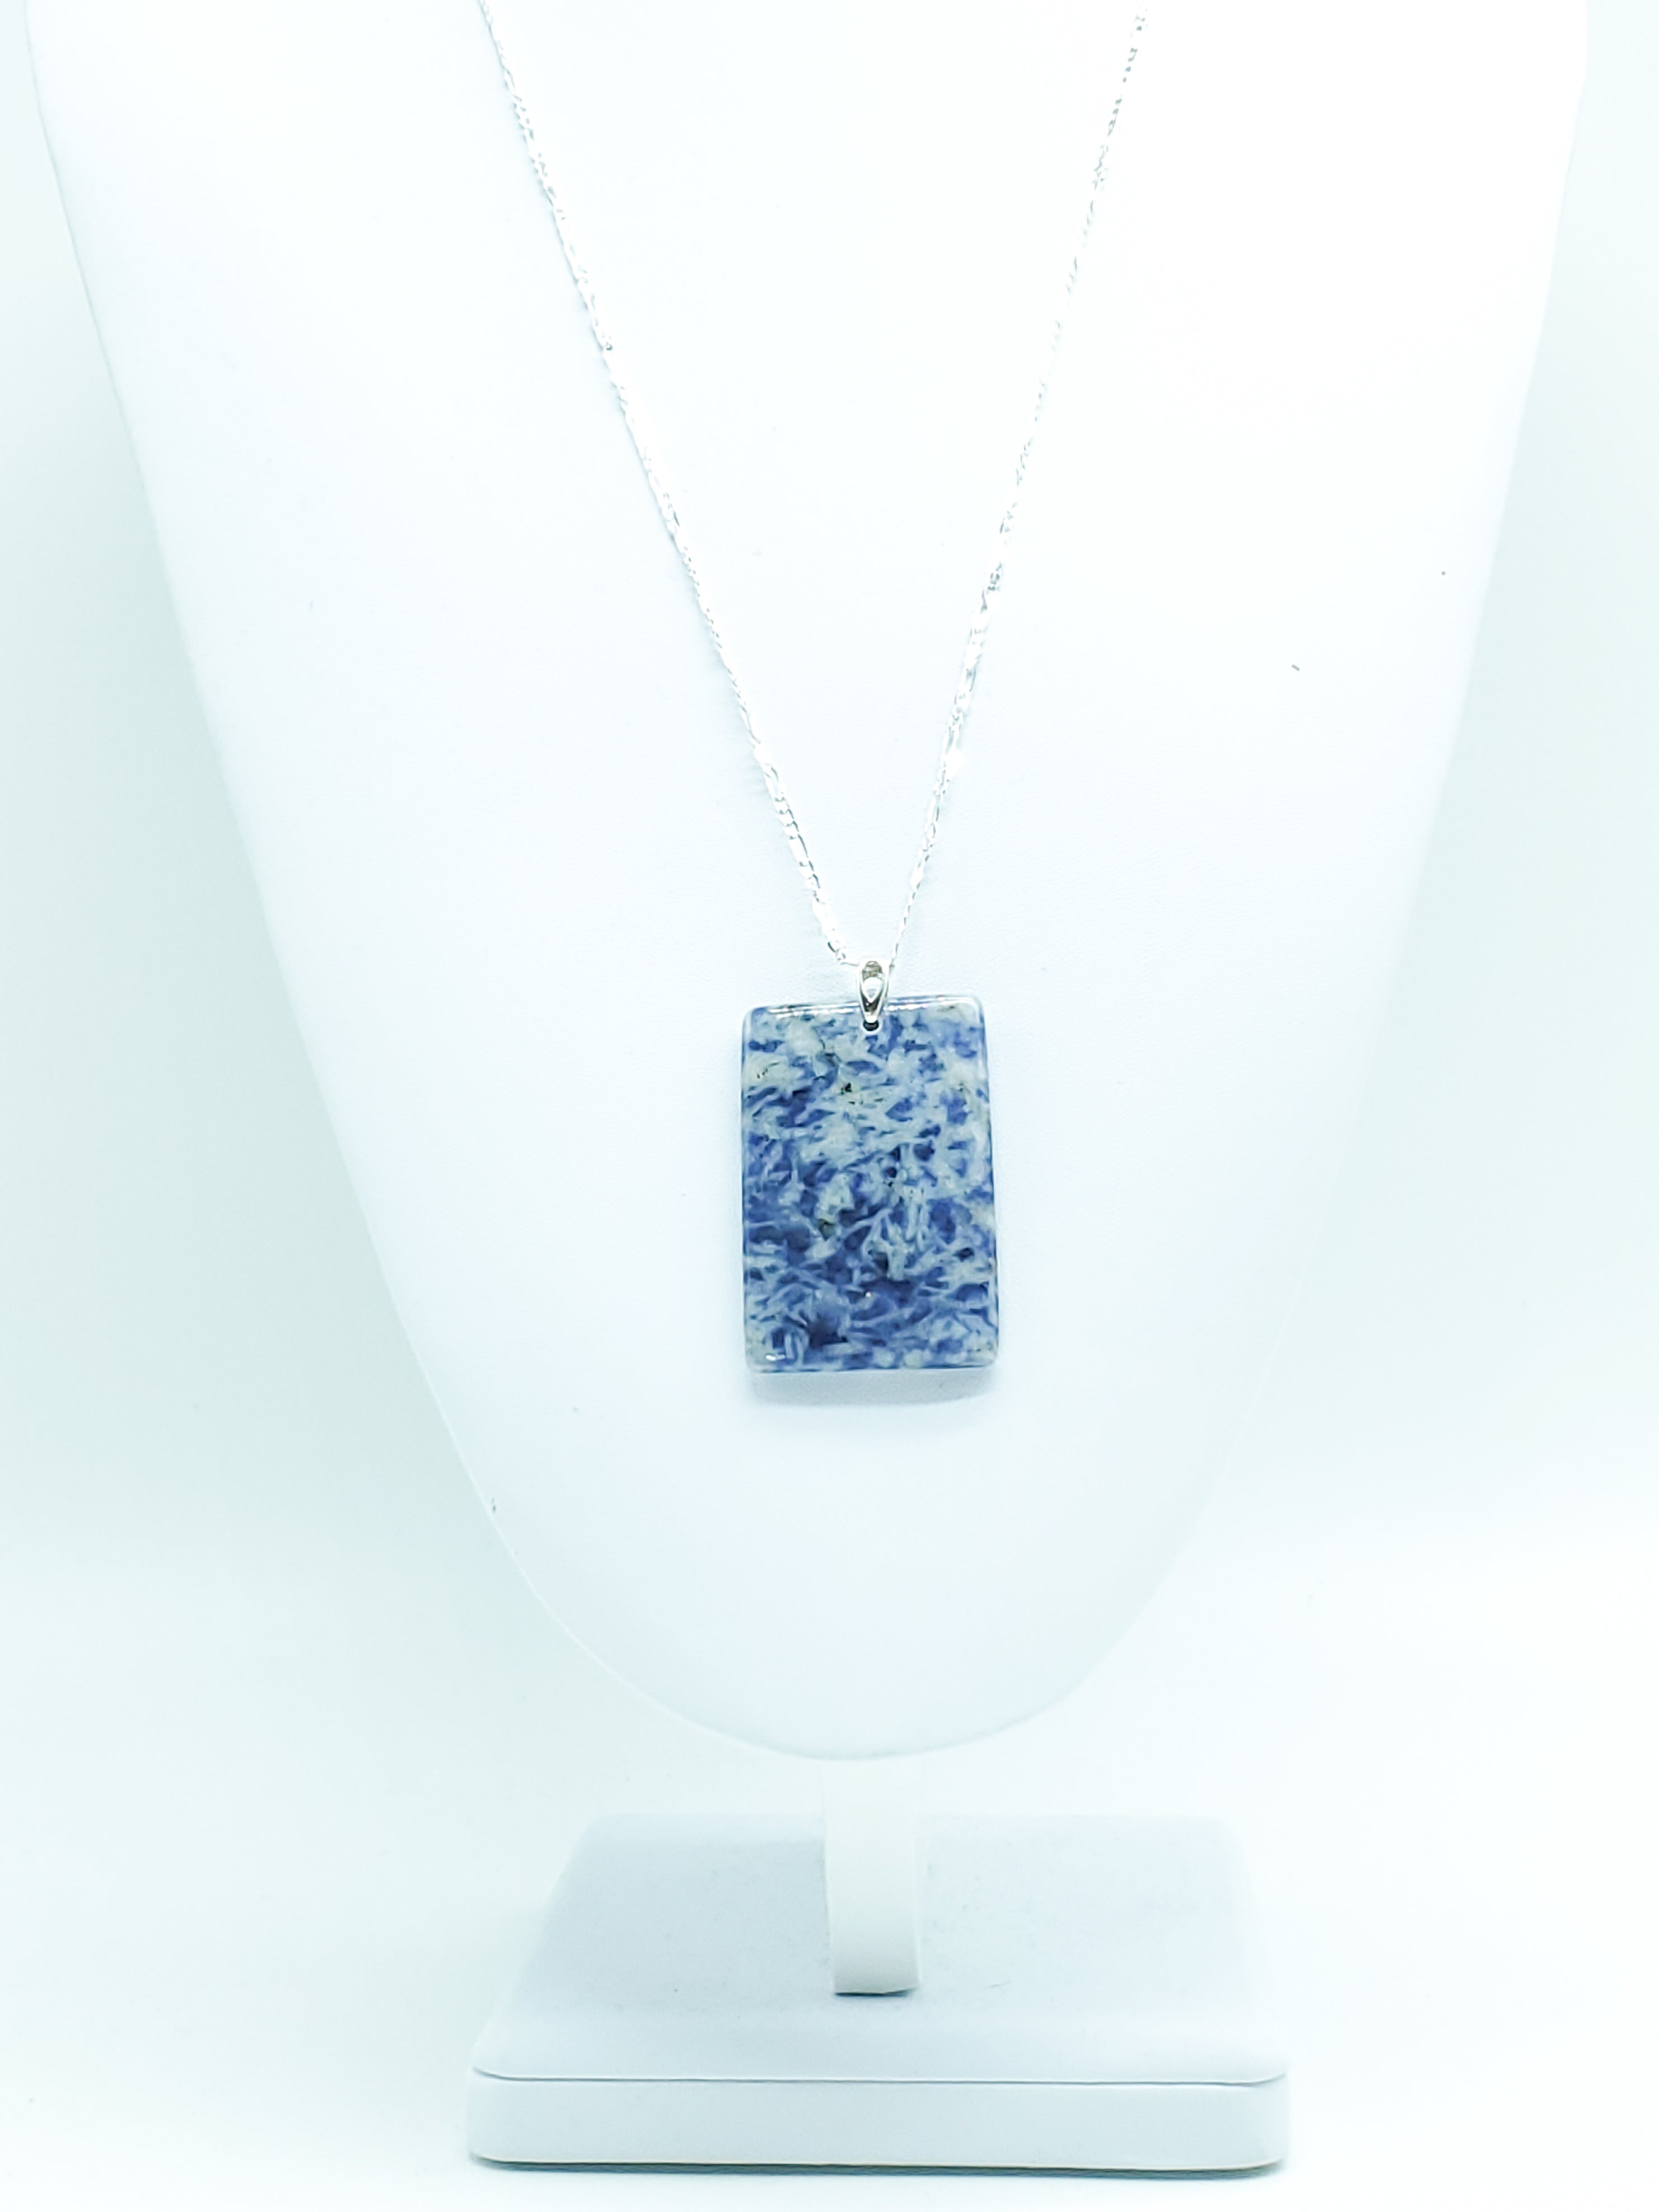 Rectangular Sodalite Pendant on Sterling Silver Bail and Figaro Chain - The Caffeinated Raven